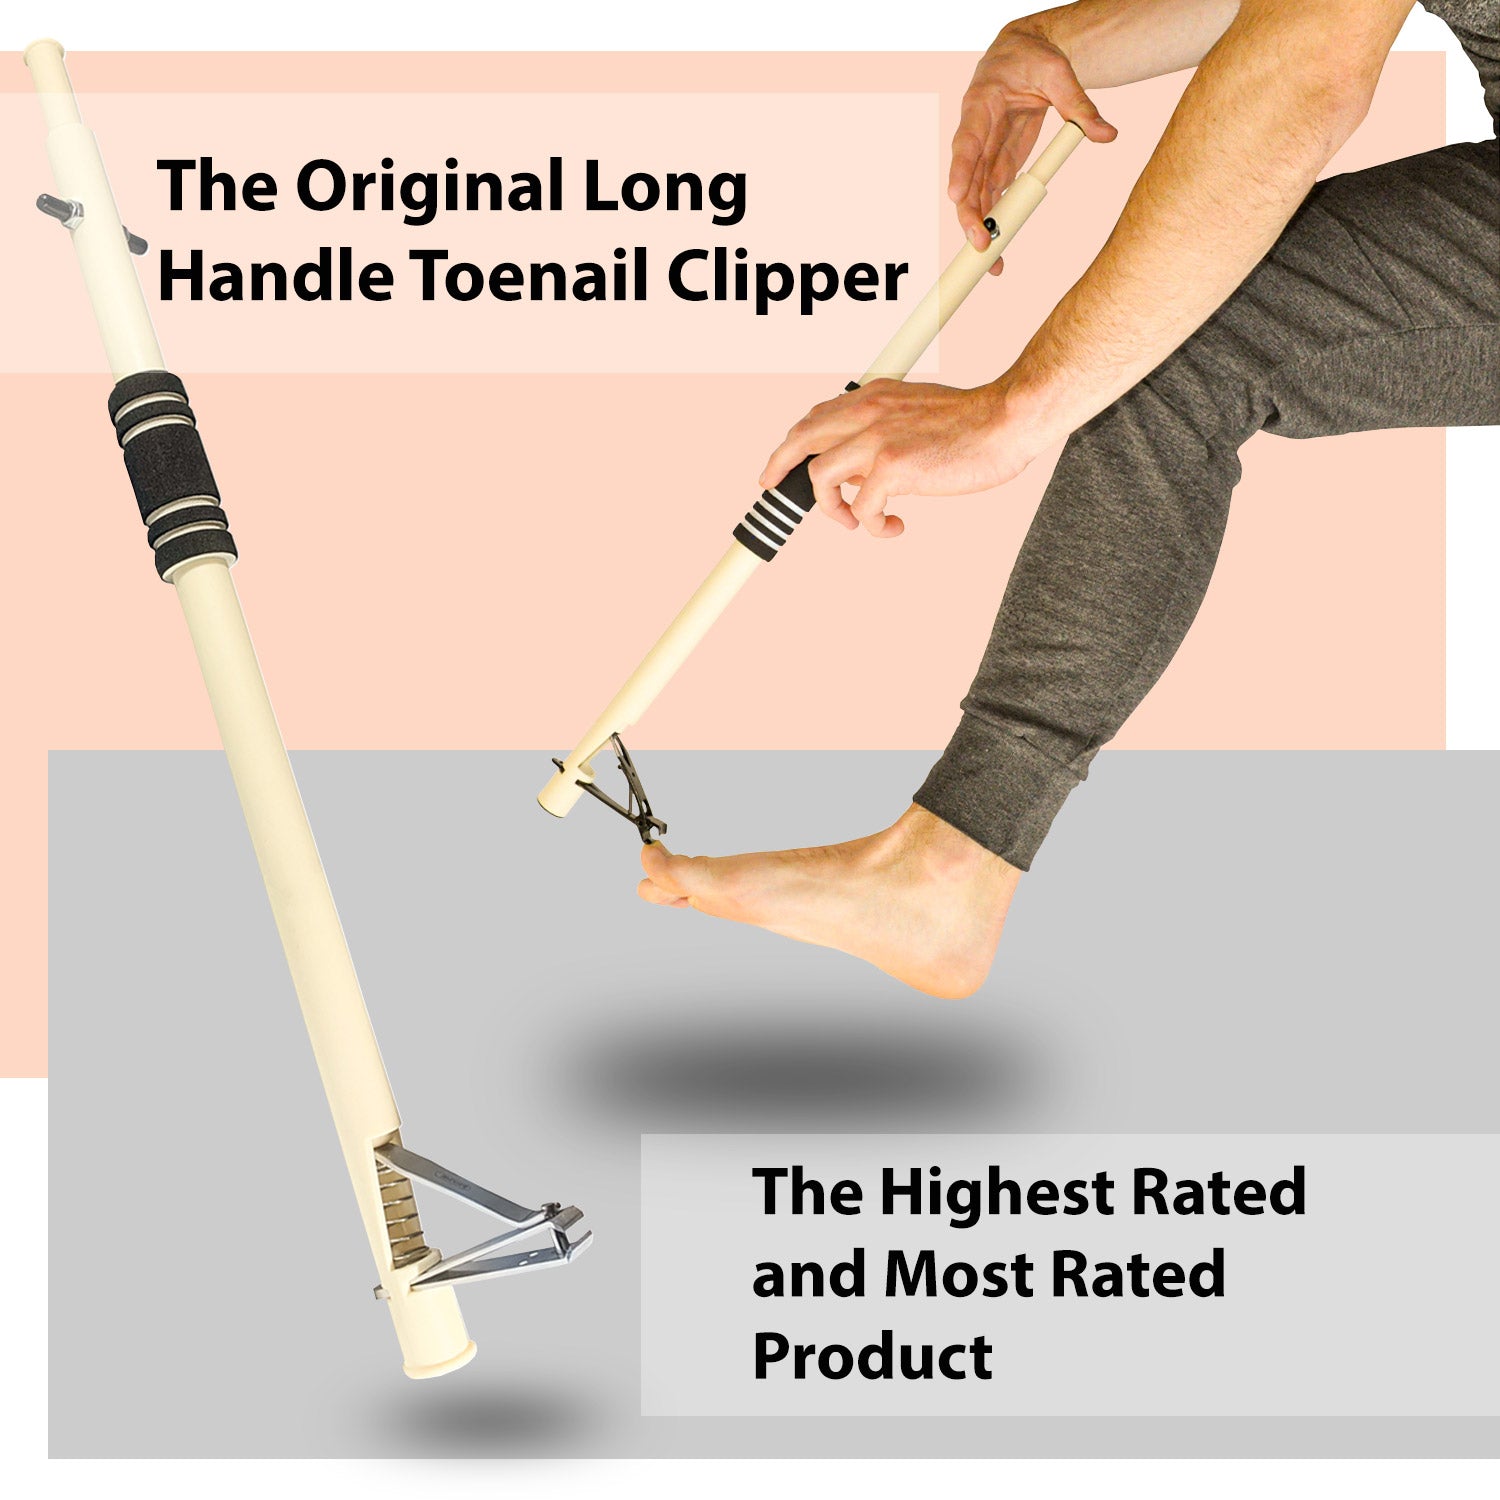 Long Handle Toenail Clippers for Seniors - Buy Now! - Payne Free